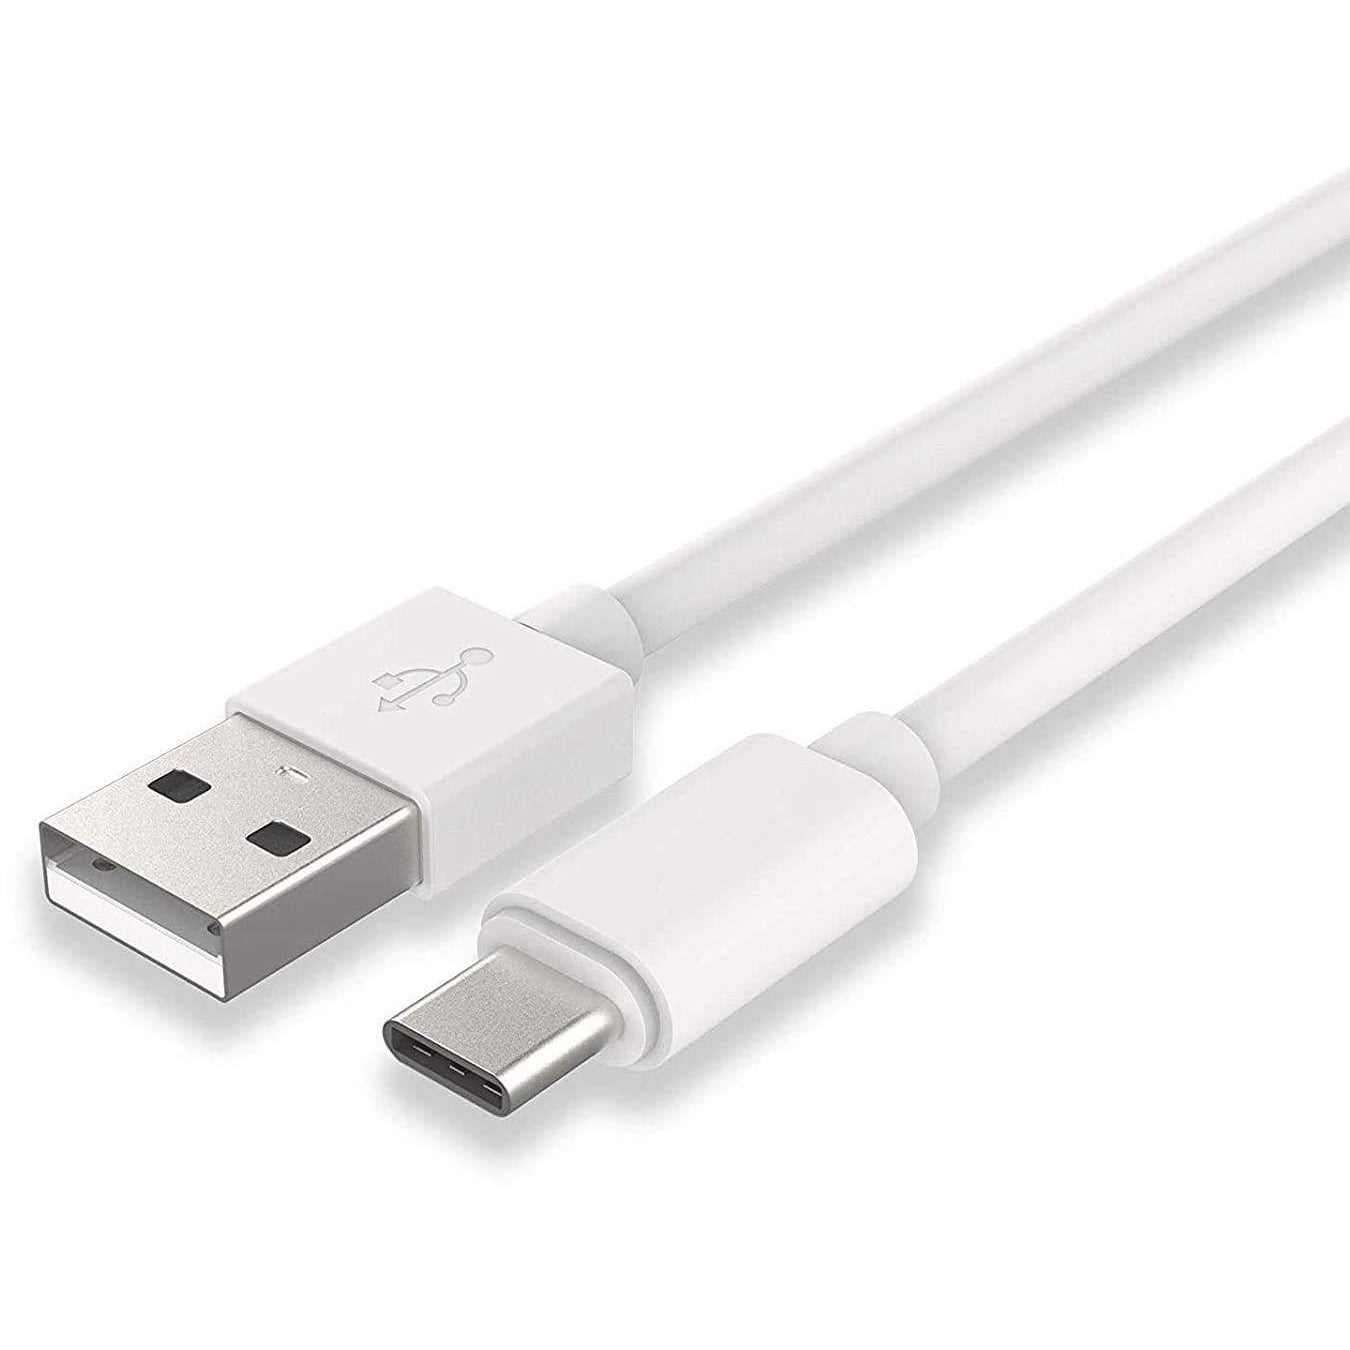 Type C USB Cables